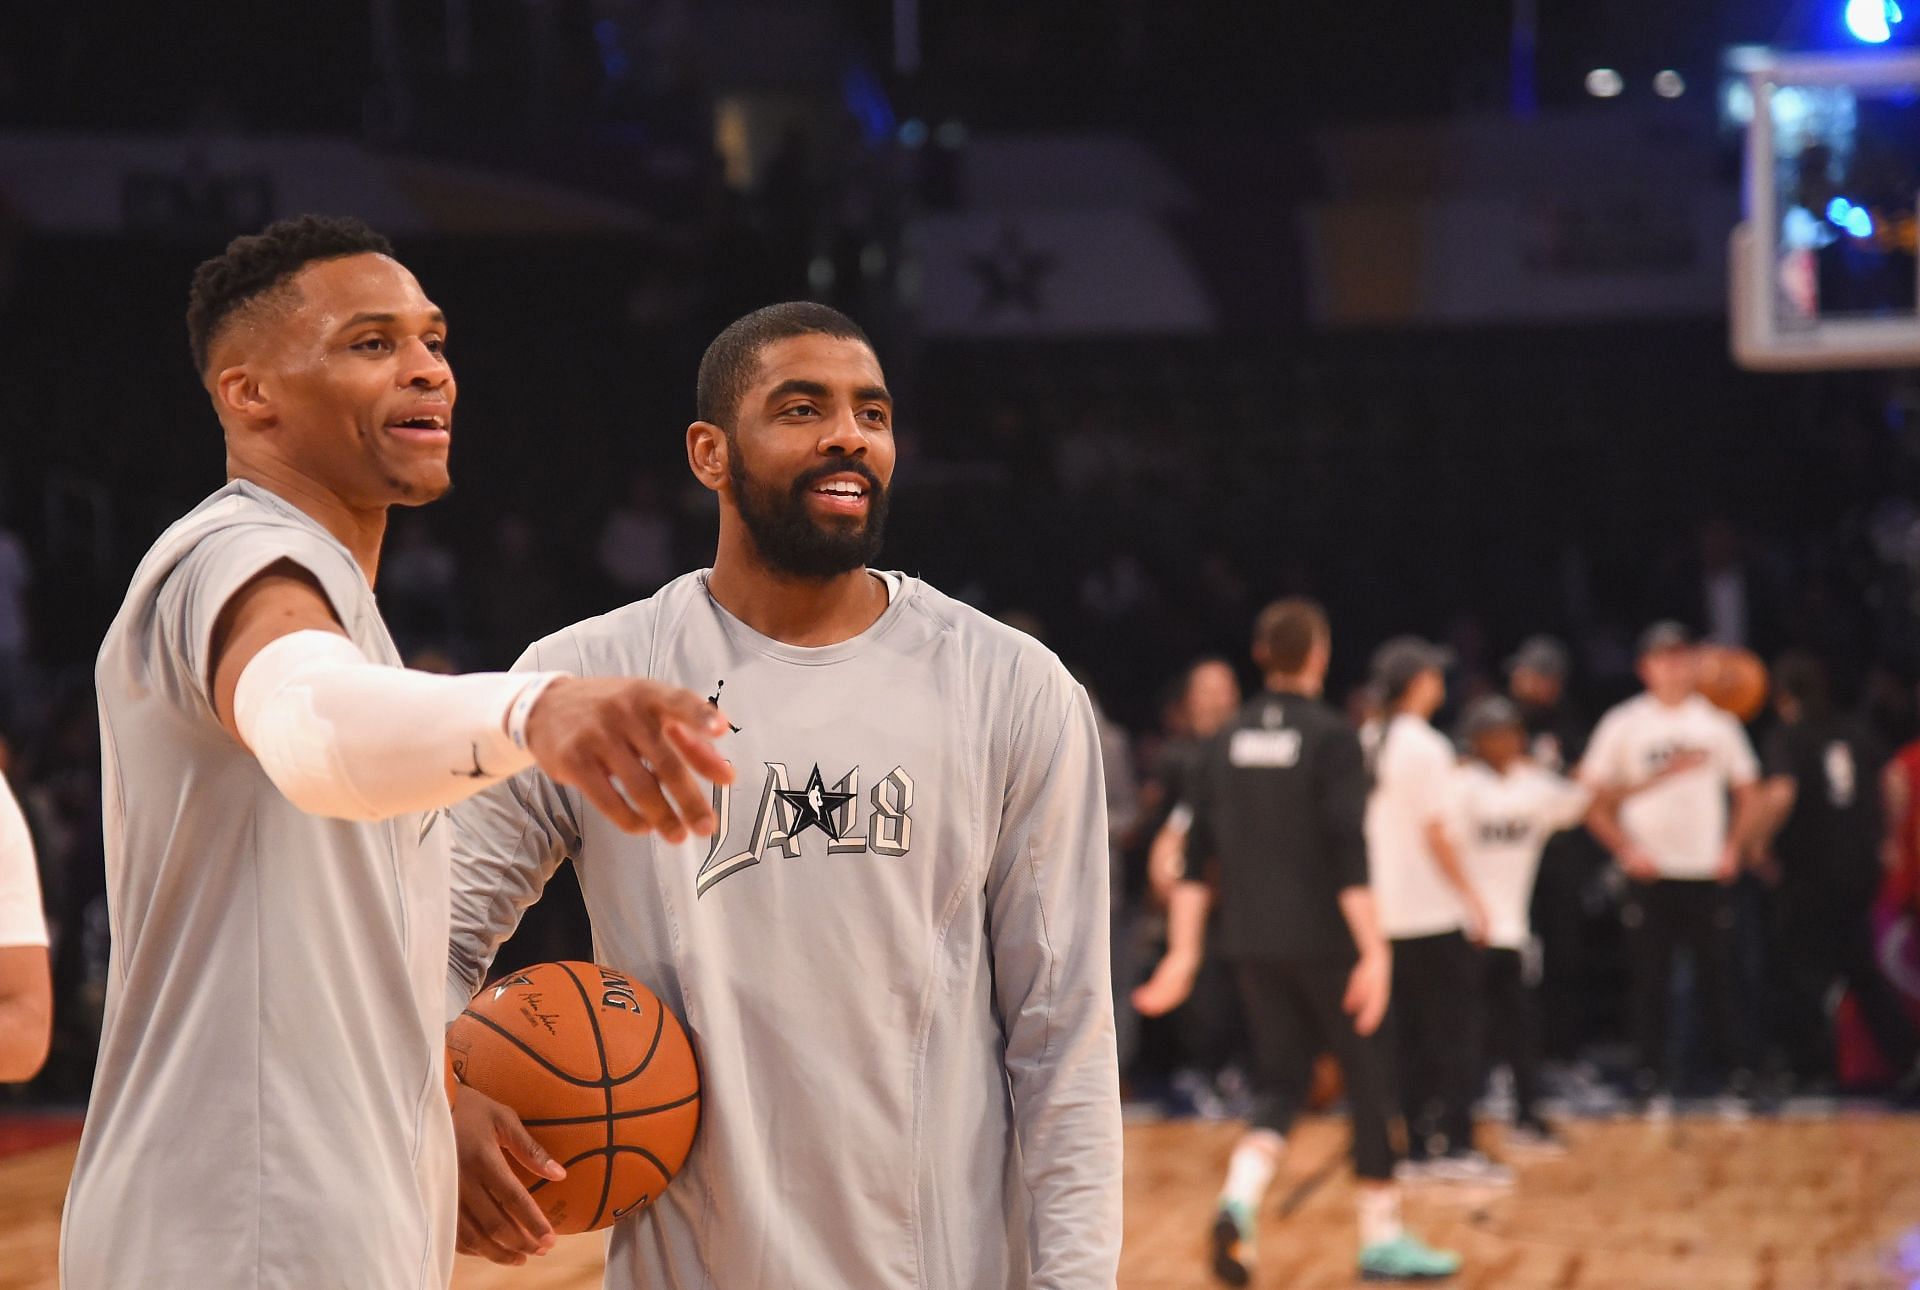 Russell Westbrook and Kyrie Irving at the 2018 NBA All-Star Game